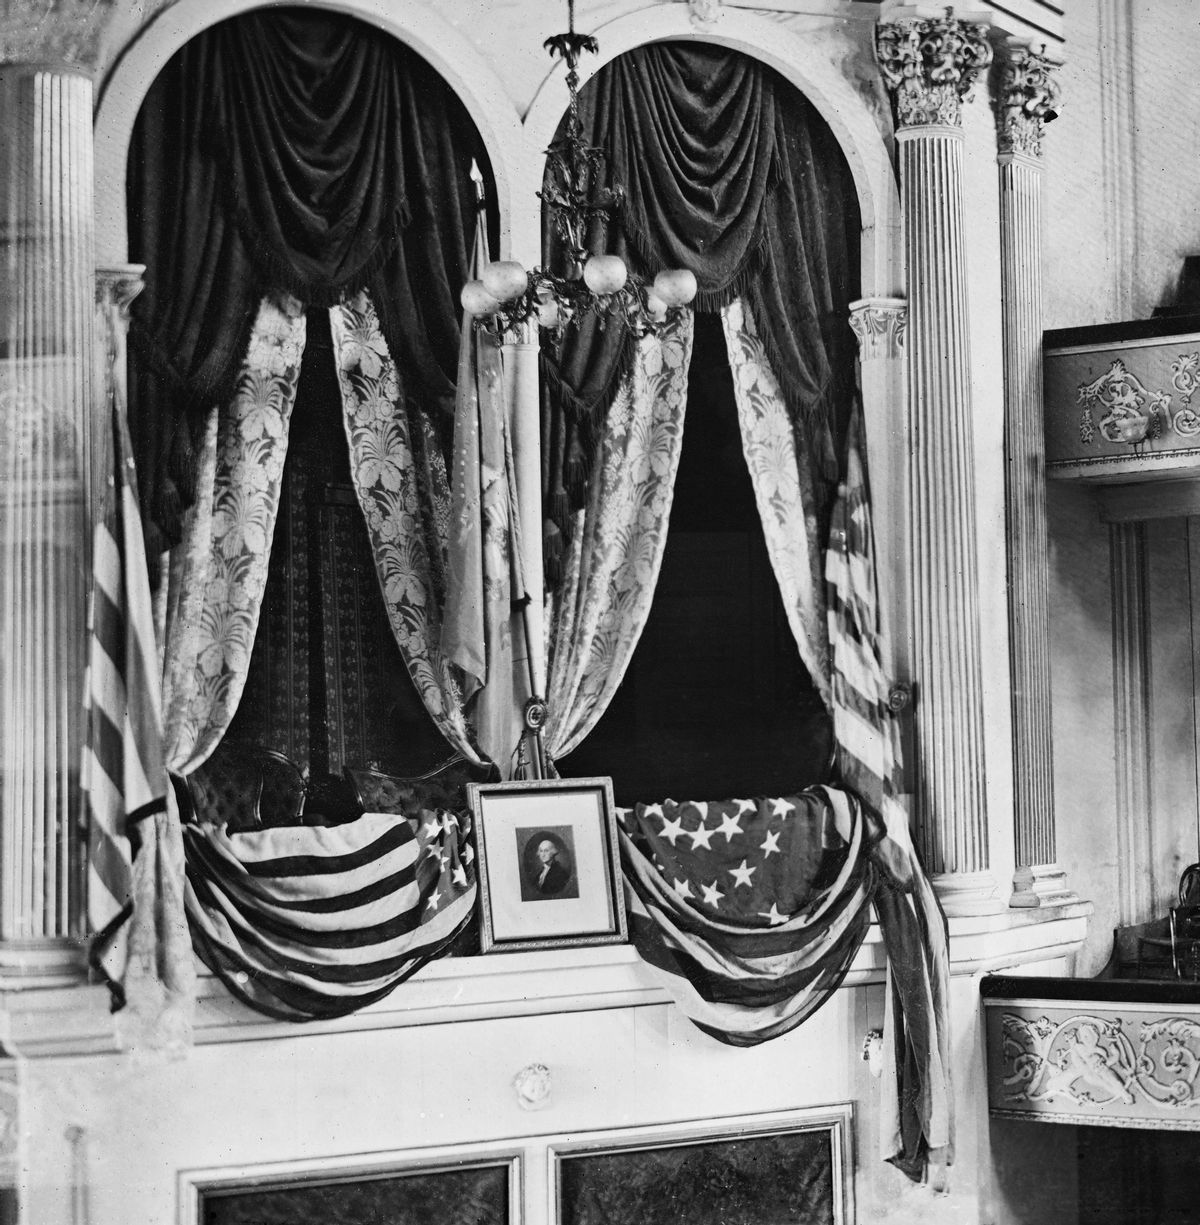 U.S. President Abraham Lincoln's Box at Ford's Theater, Washington DC, USA, April 1865. (Photo by: Universal History Archive/Universal Images Group via Getty Images) (Universal History Archive / Contributor (1865))